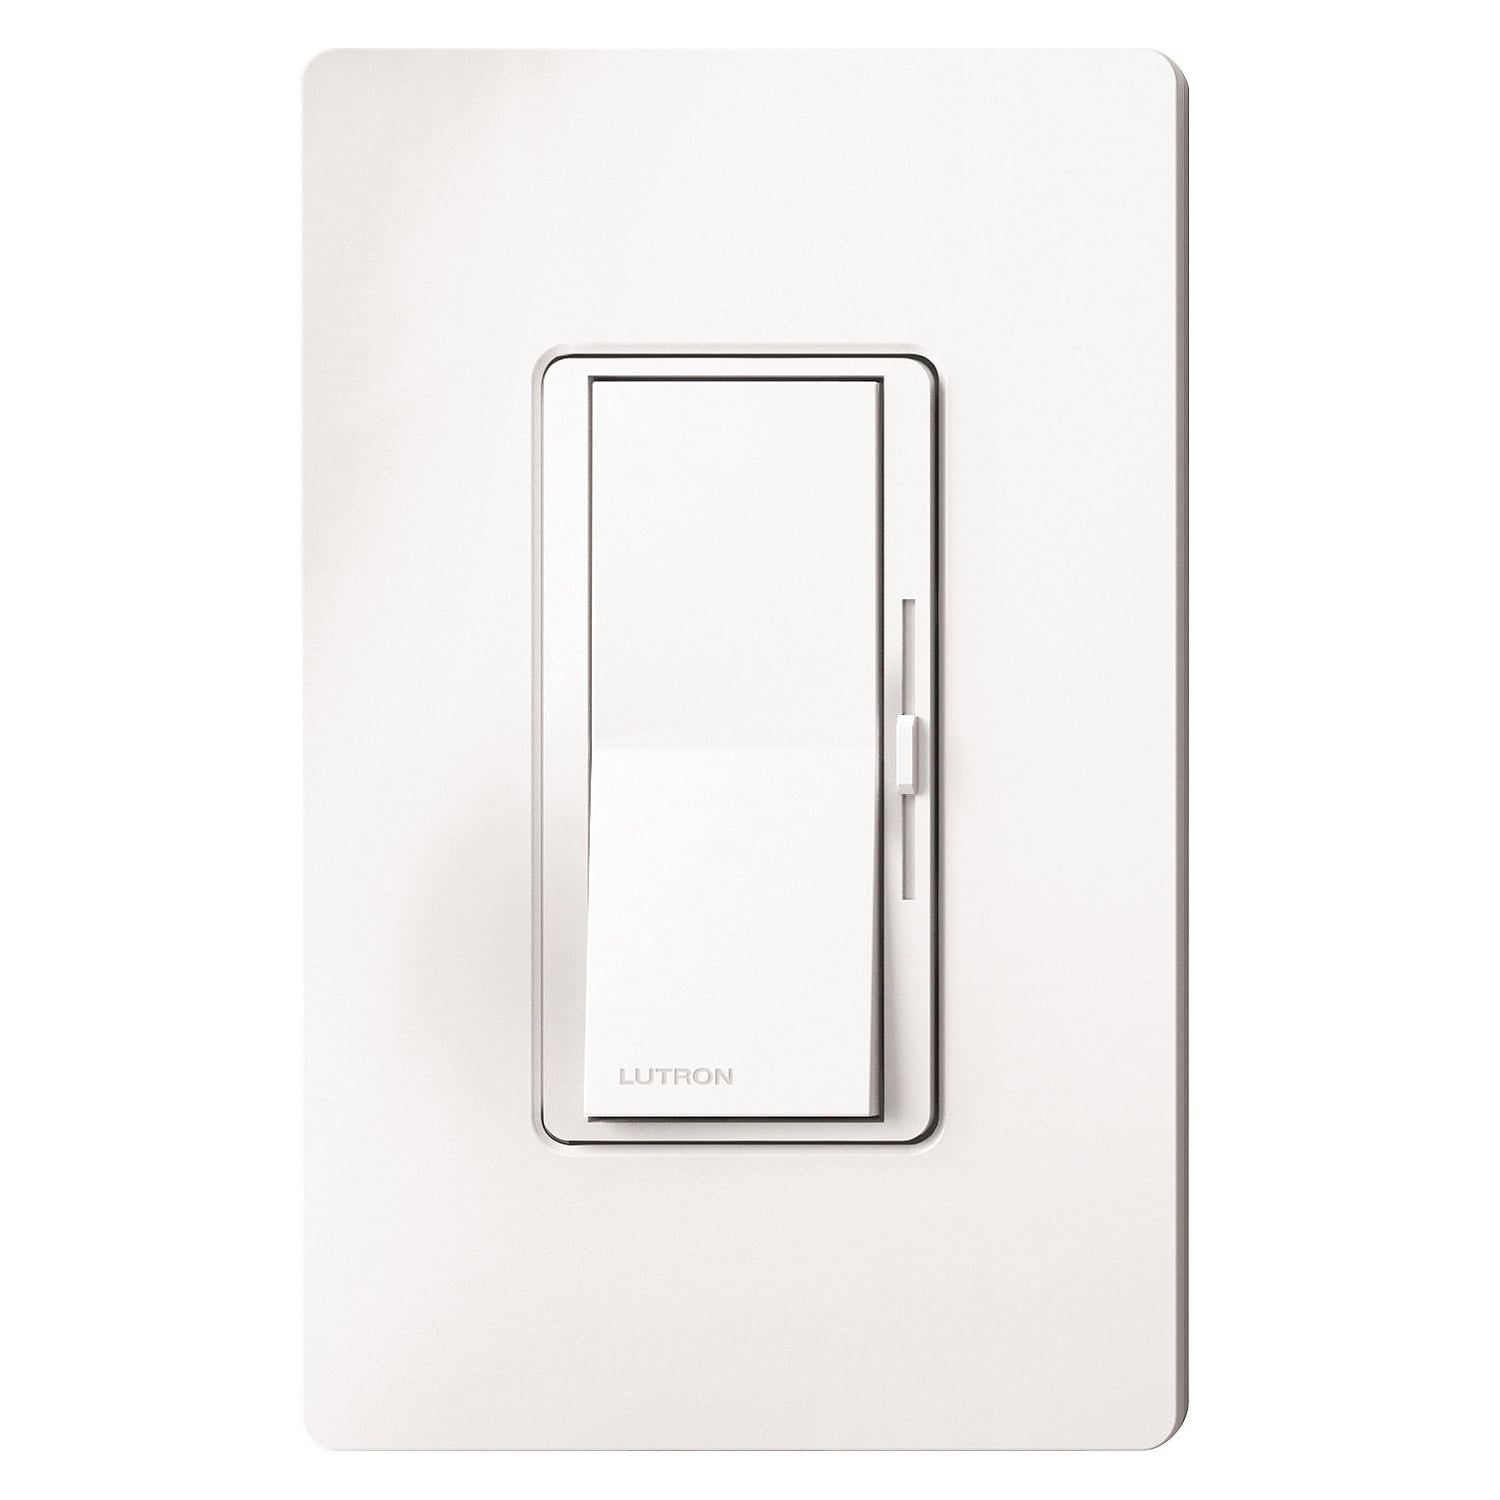 Lutron DVW 603 Ph La Contemporary 3-way Dimmer Screwless Plate Light Almond for sale online 